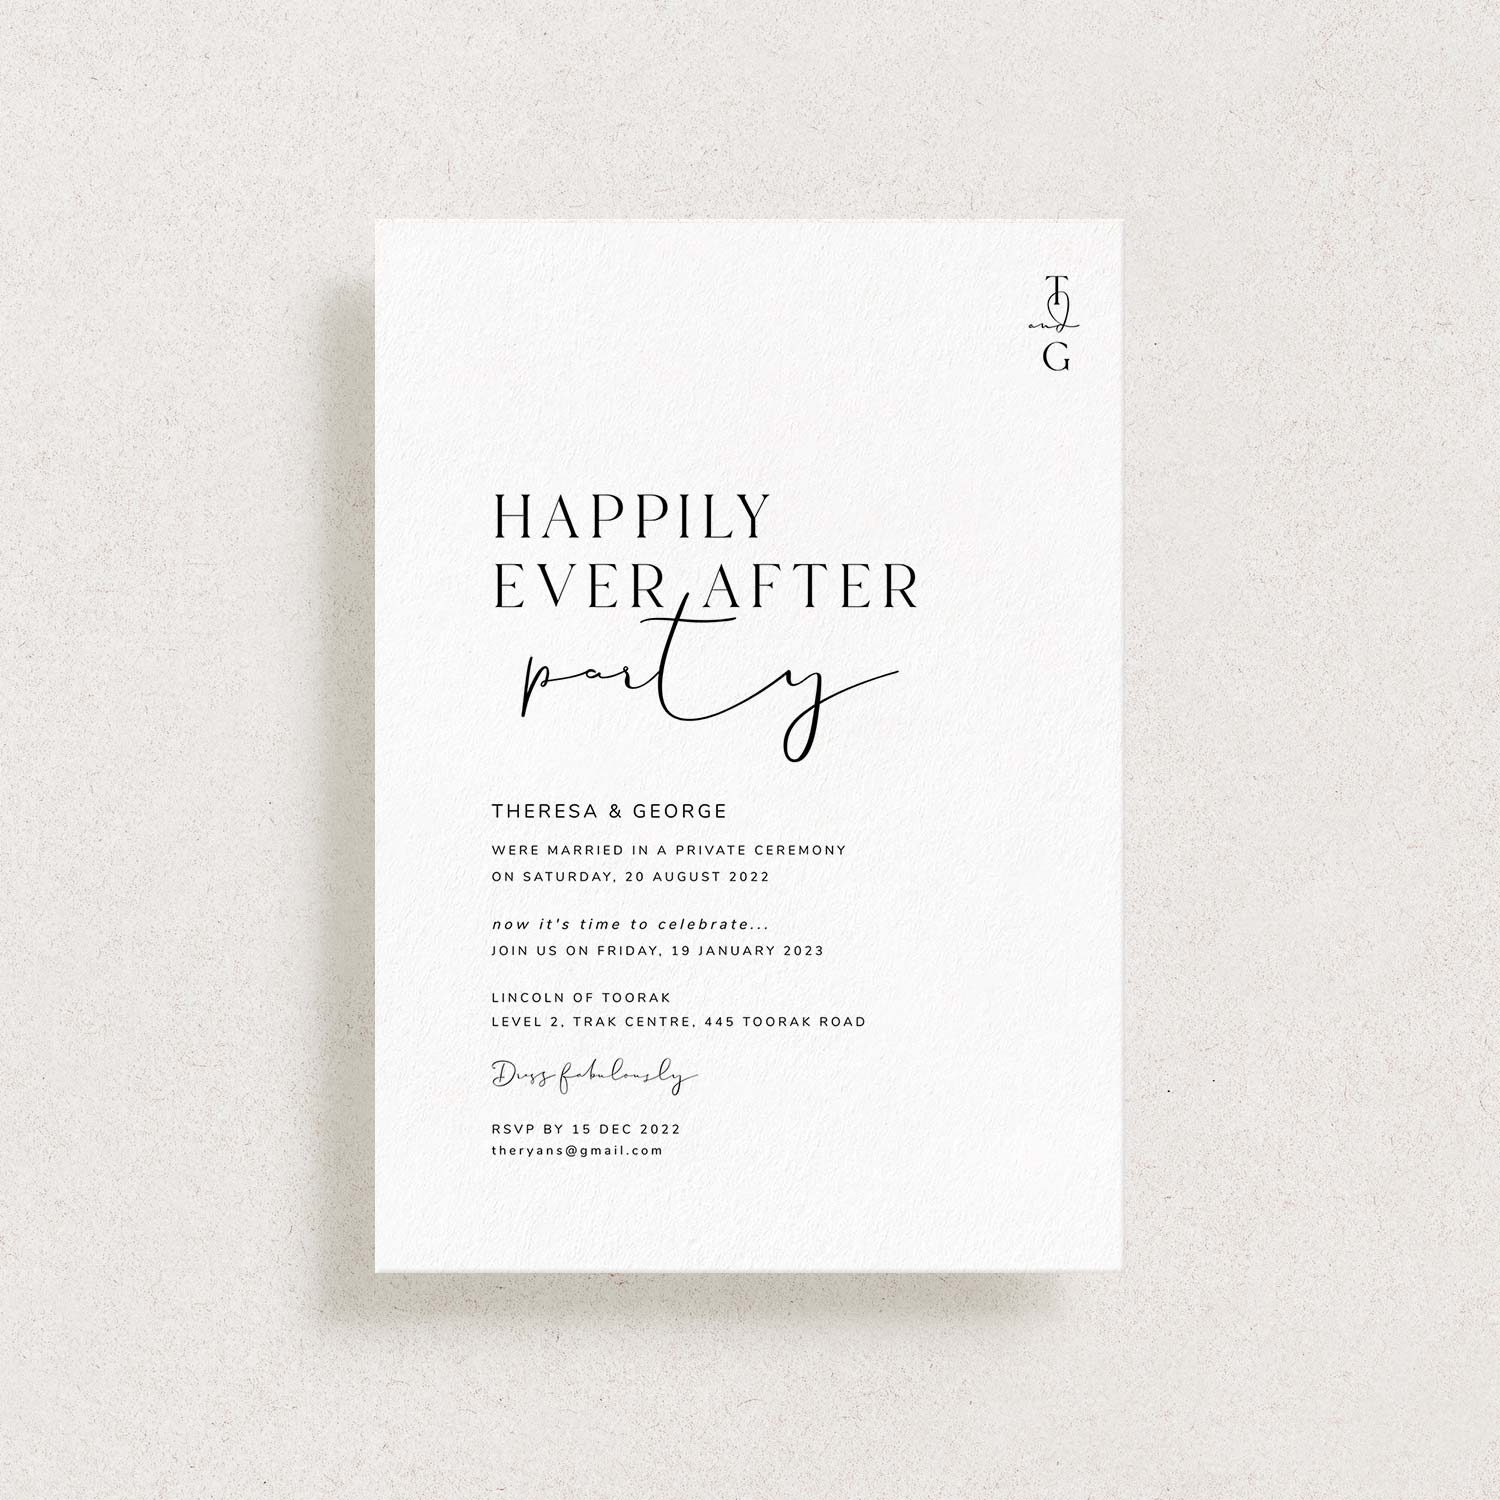 Happily Ever After Reception Invitation Template, MONOGRAM